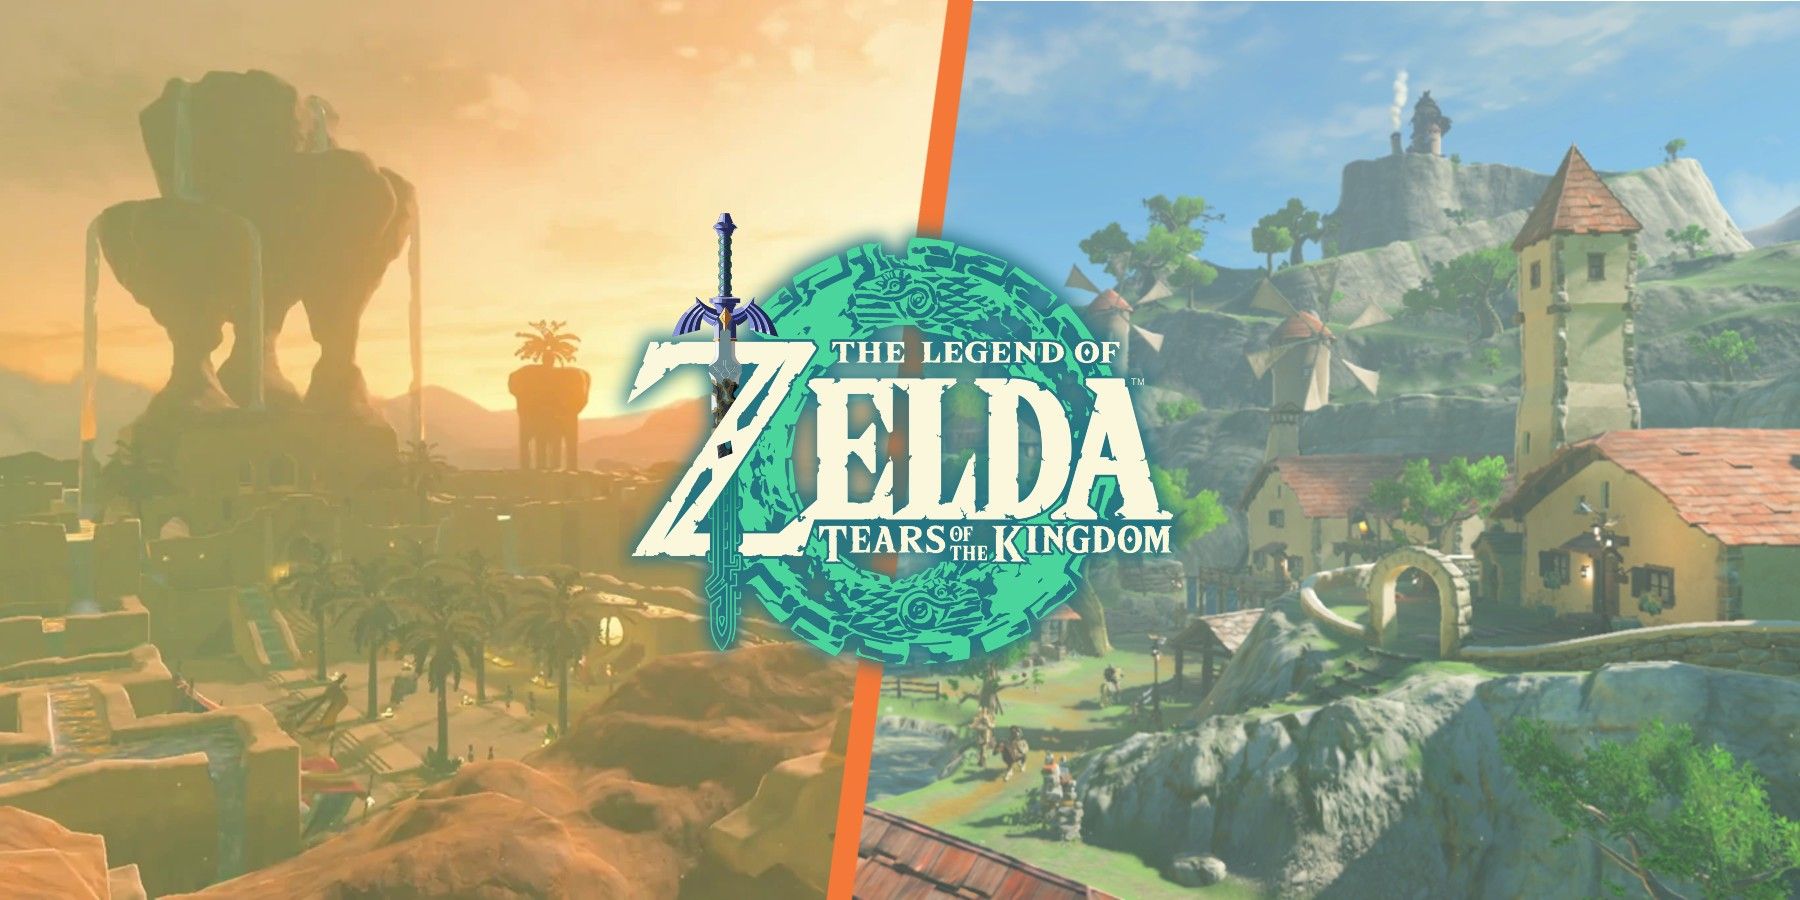 Gerudo Town and Hateno Village side-by-side with The Legend of Zelda Tears of the Kingdom's logo